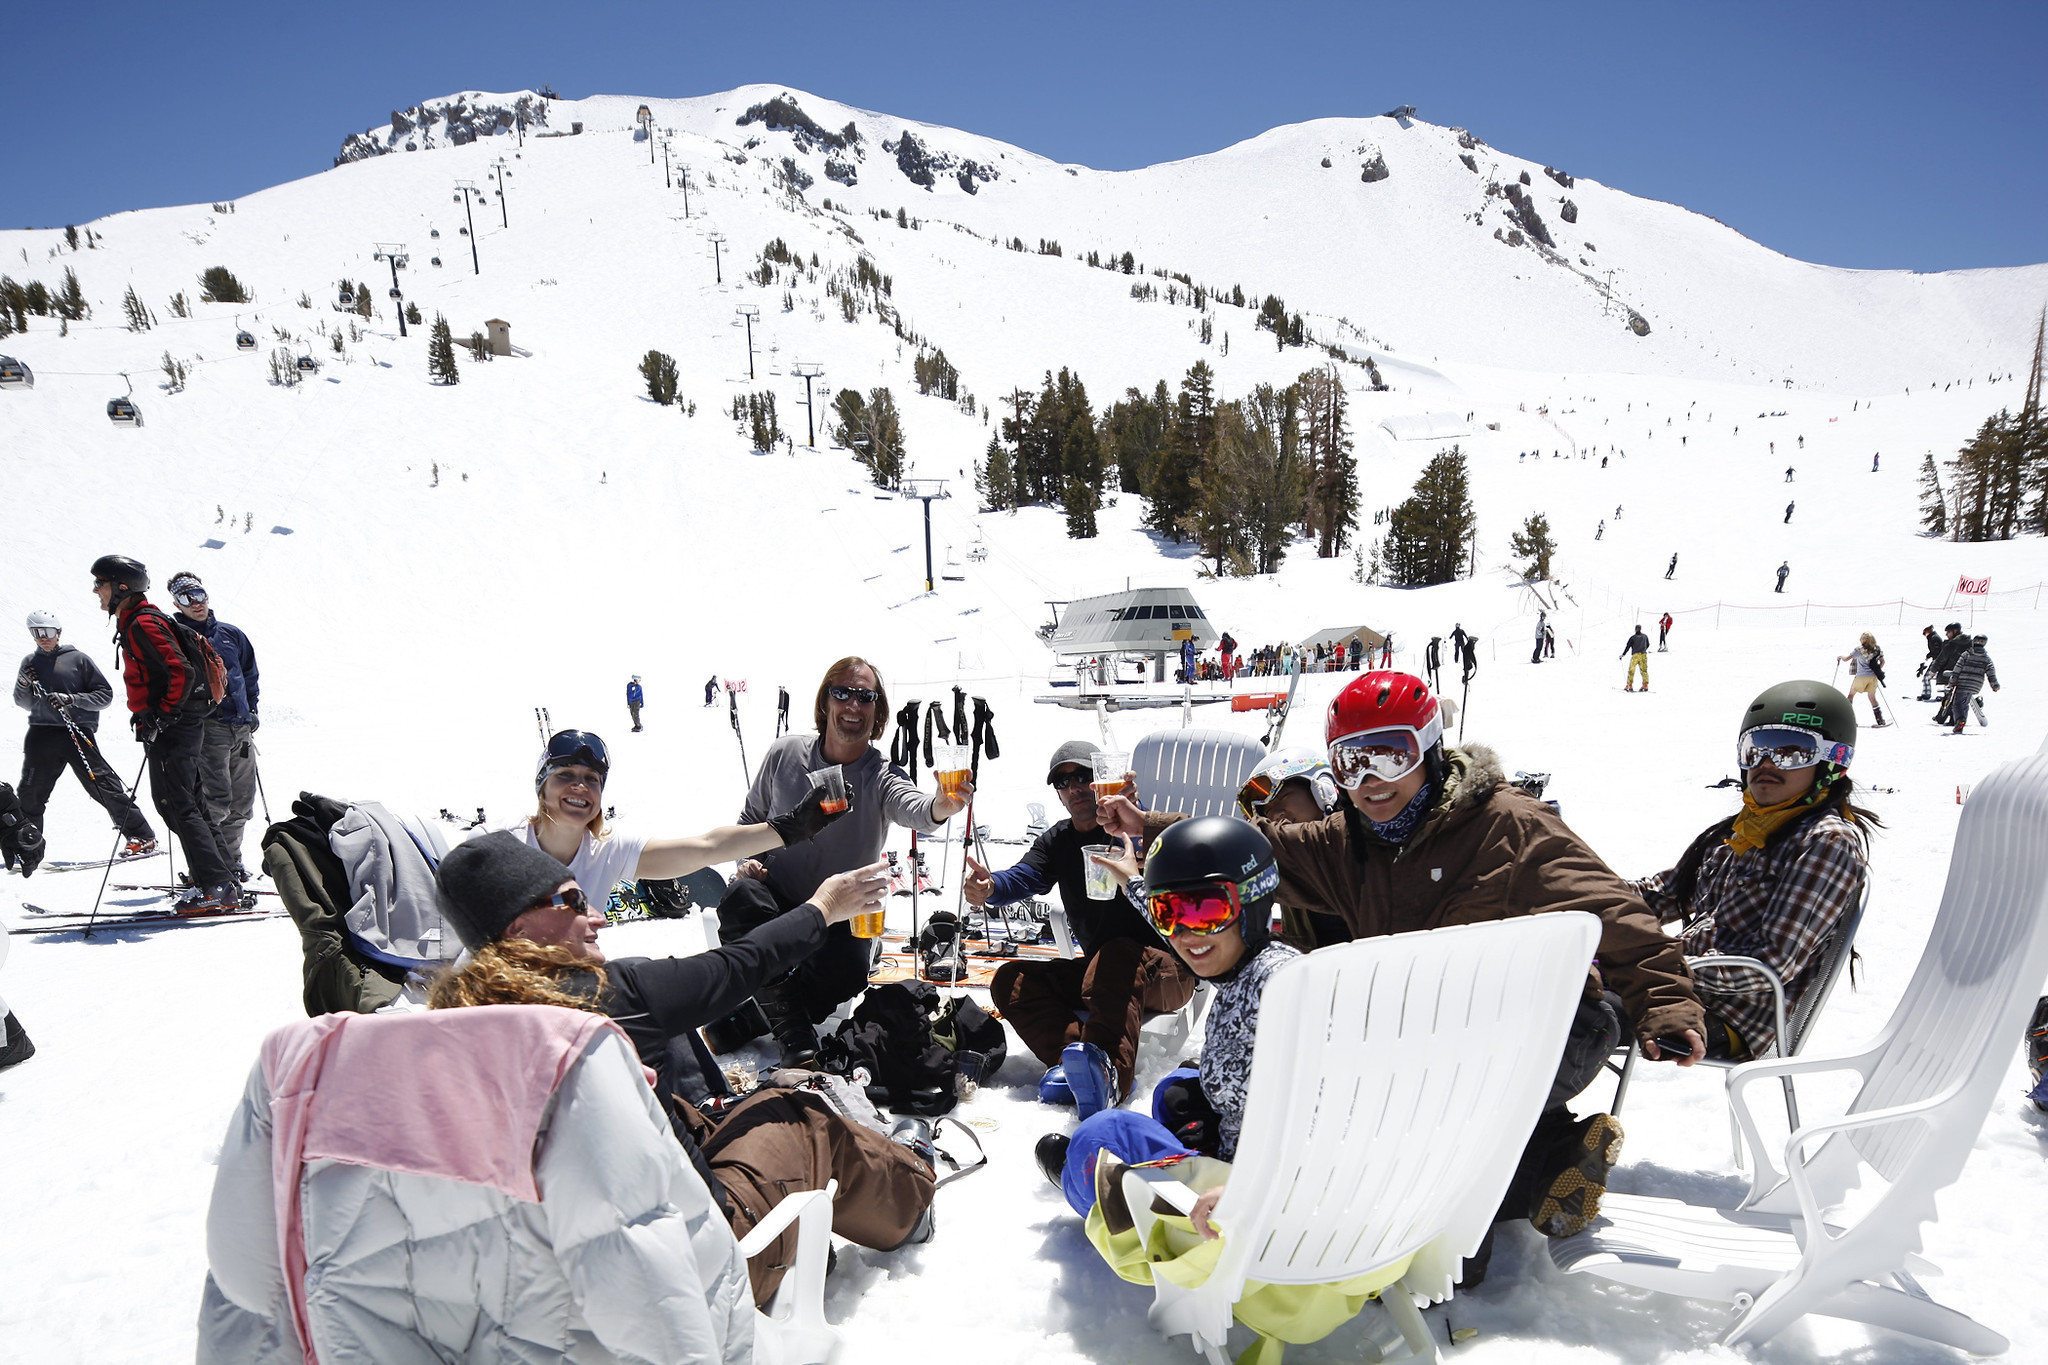 California So Cool Mammoth Lodging Deal Based On Temperature La Times